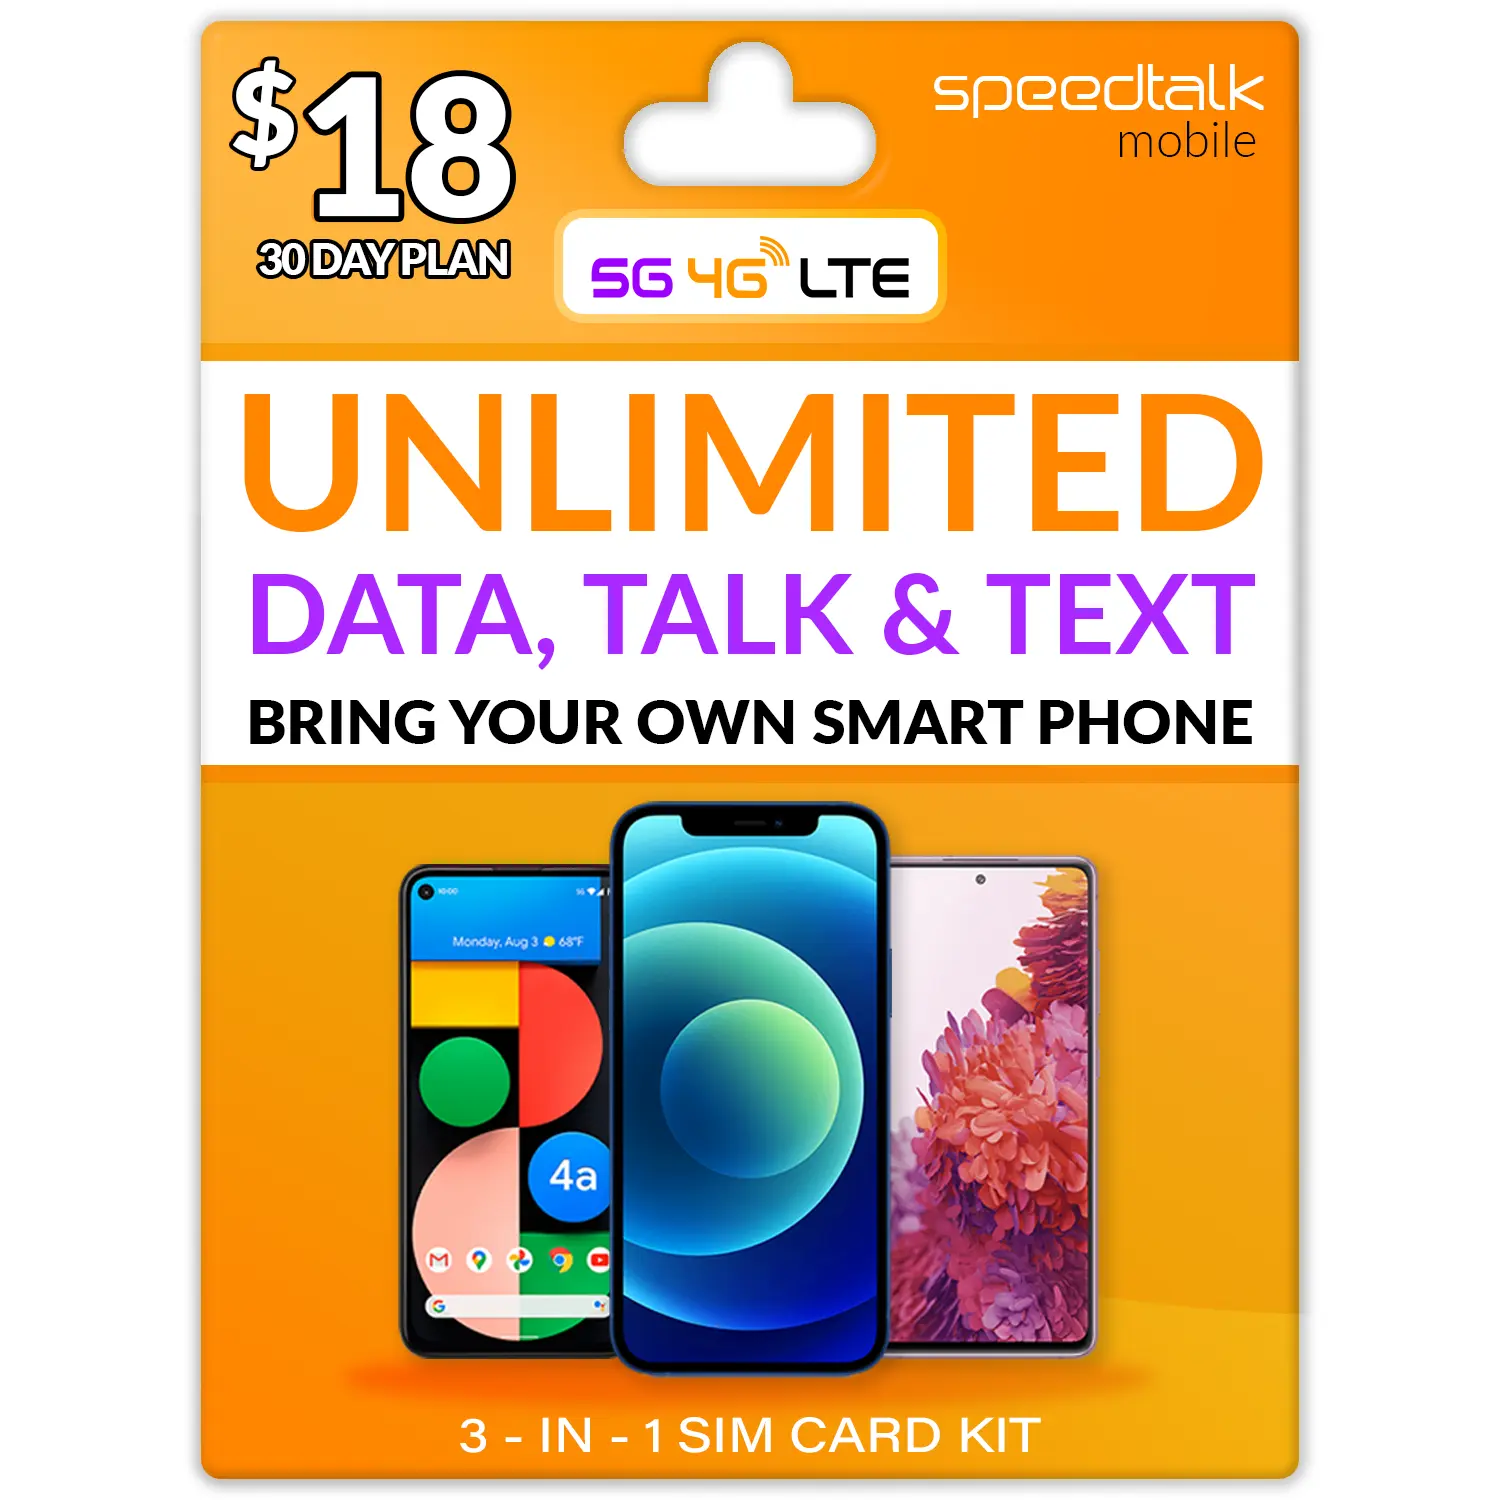 $18 UNLIMITED TALK TEXT AND DATA FOR 18 DOLLARS-BRING YOU OWN PHONE- SPEED TALK MOBILE